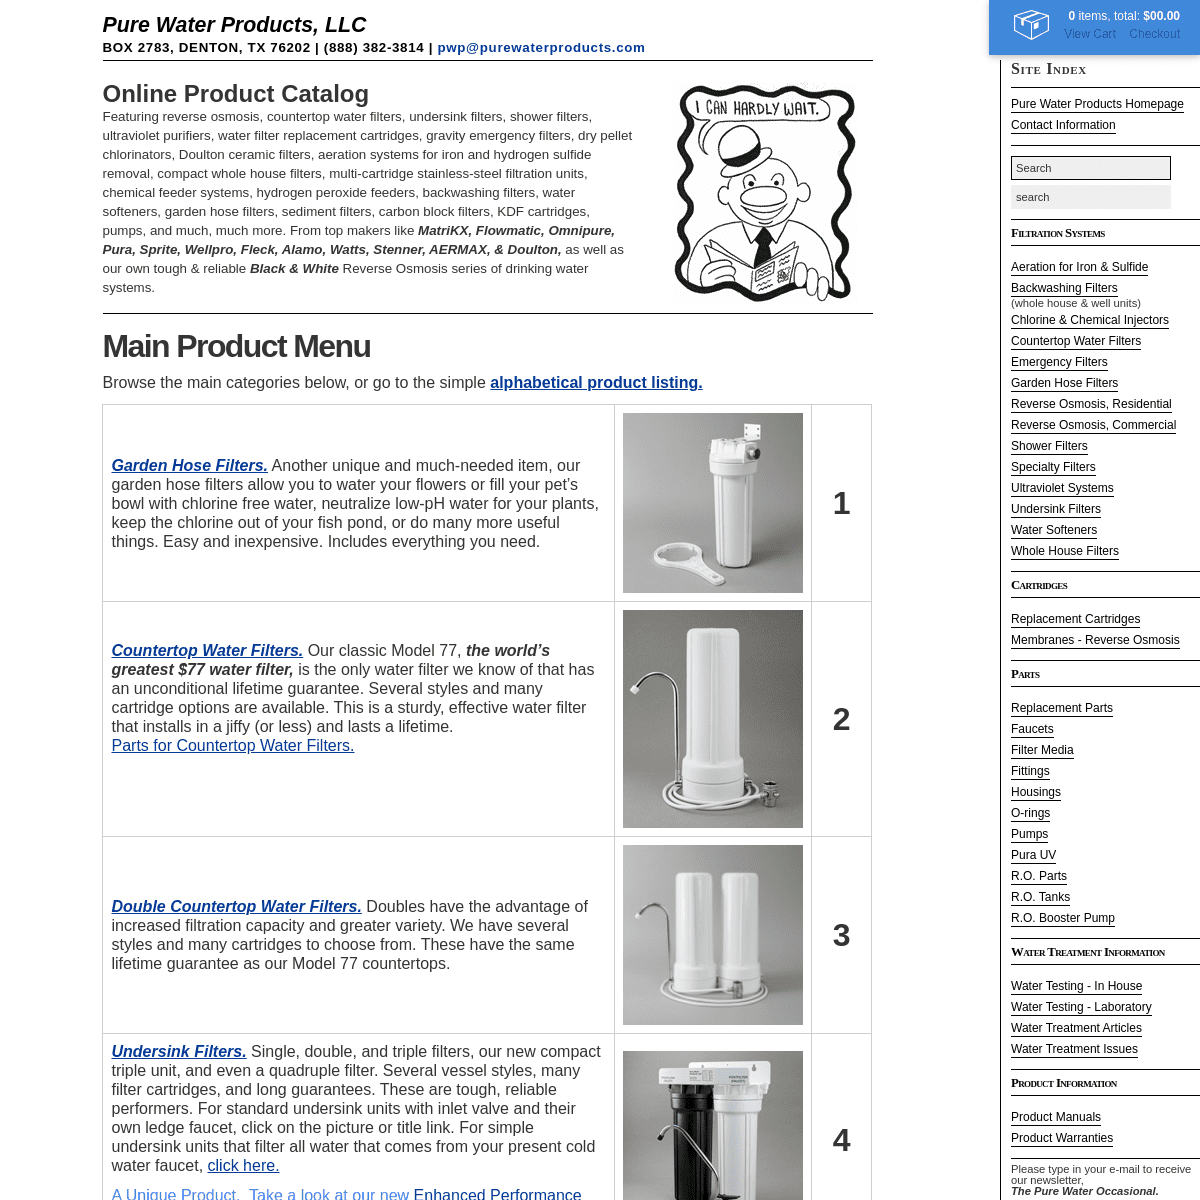 A complete backup of https://purewaterproducts.com